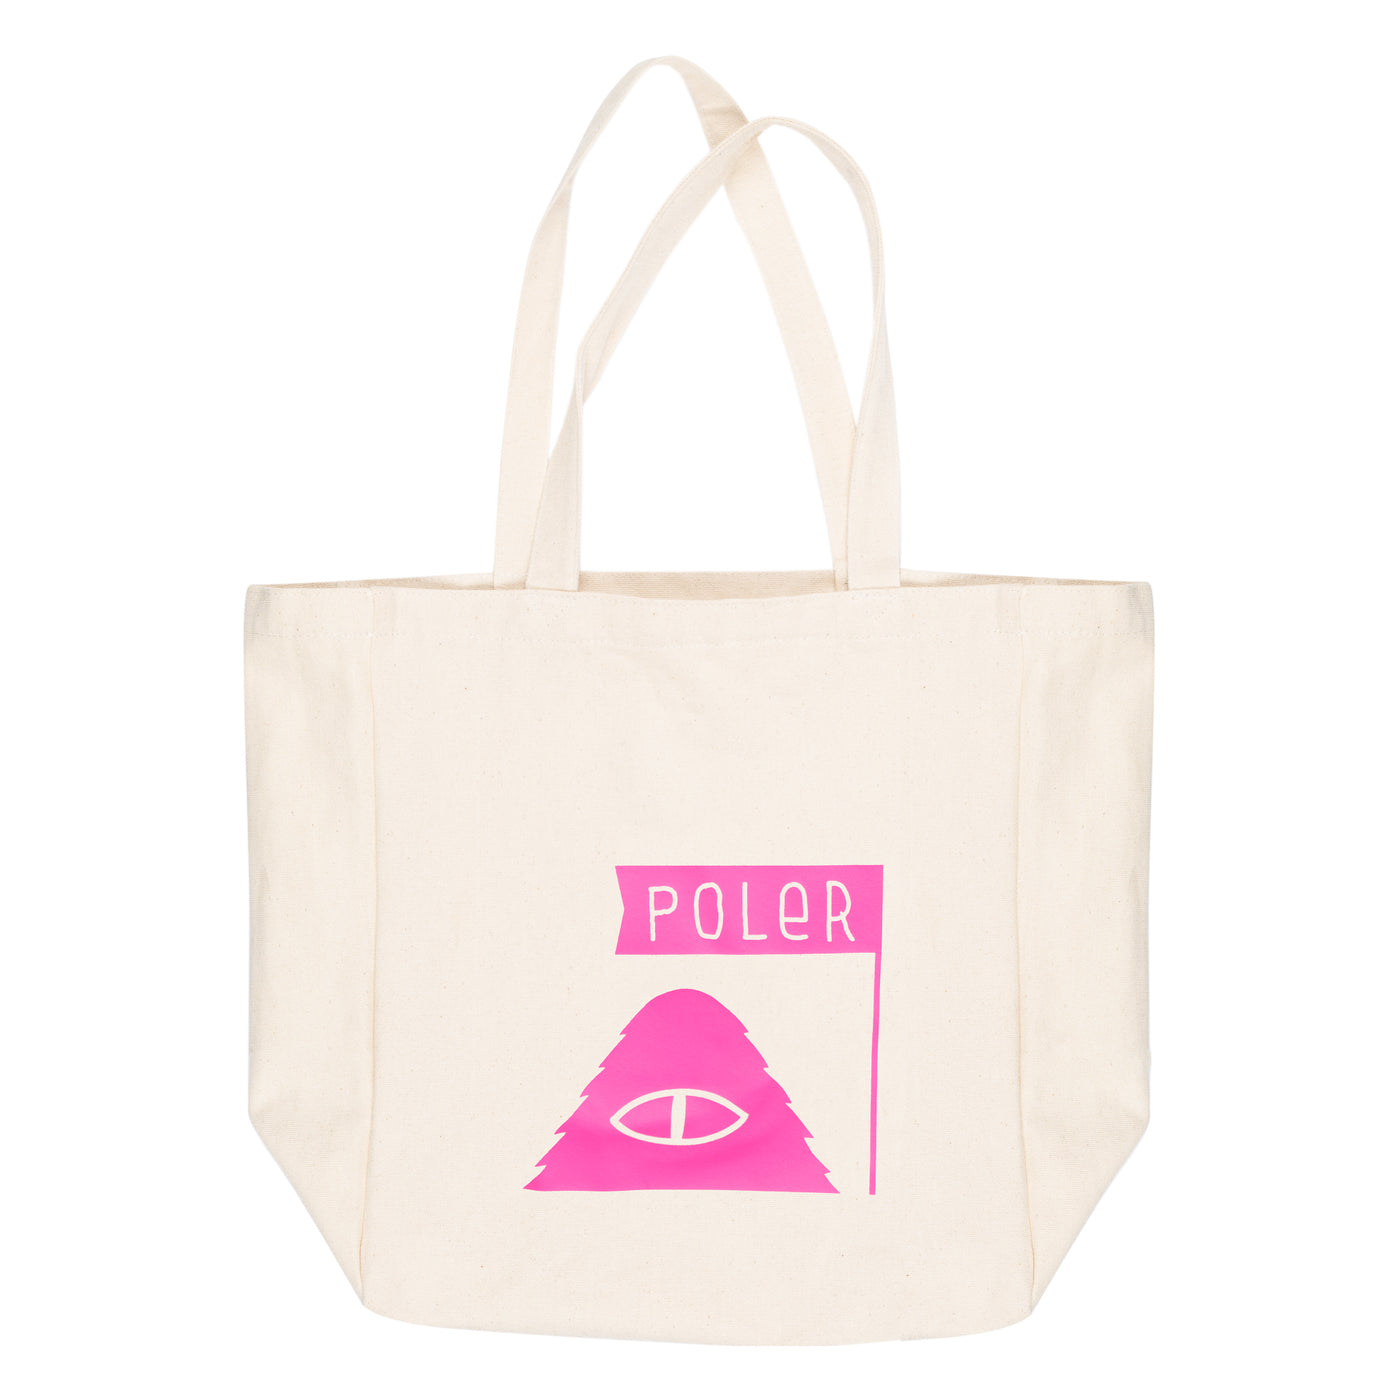 Tote product   